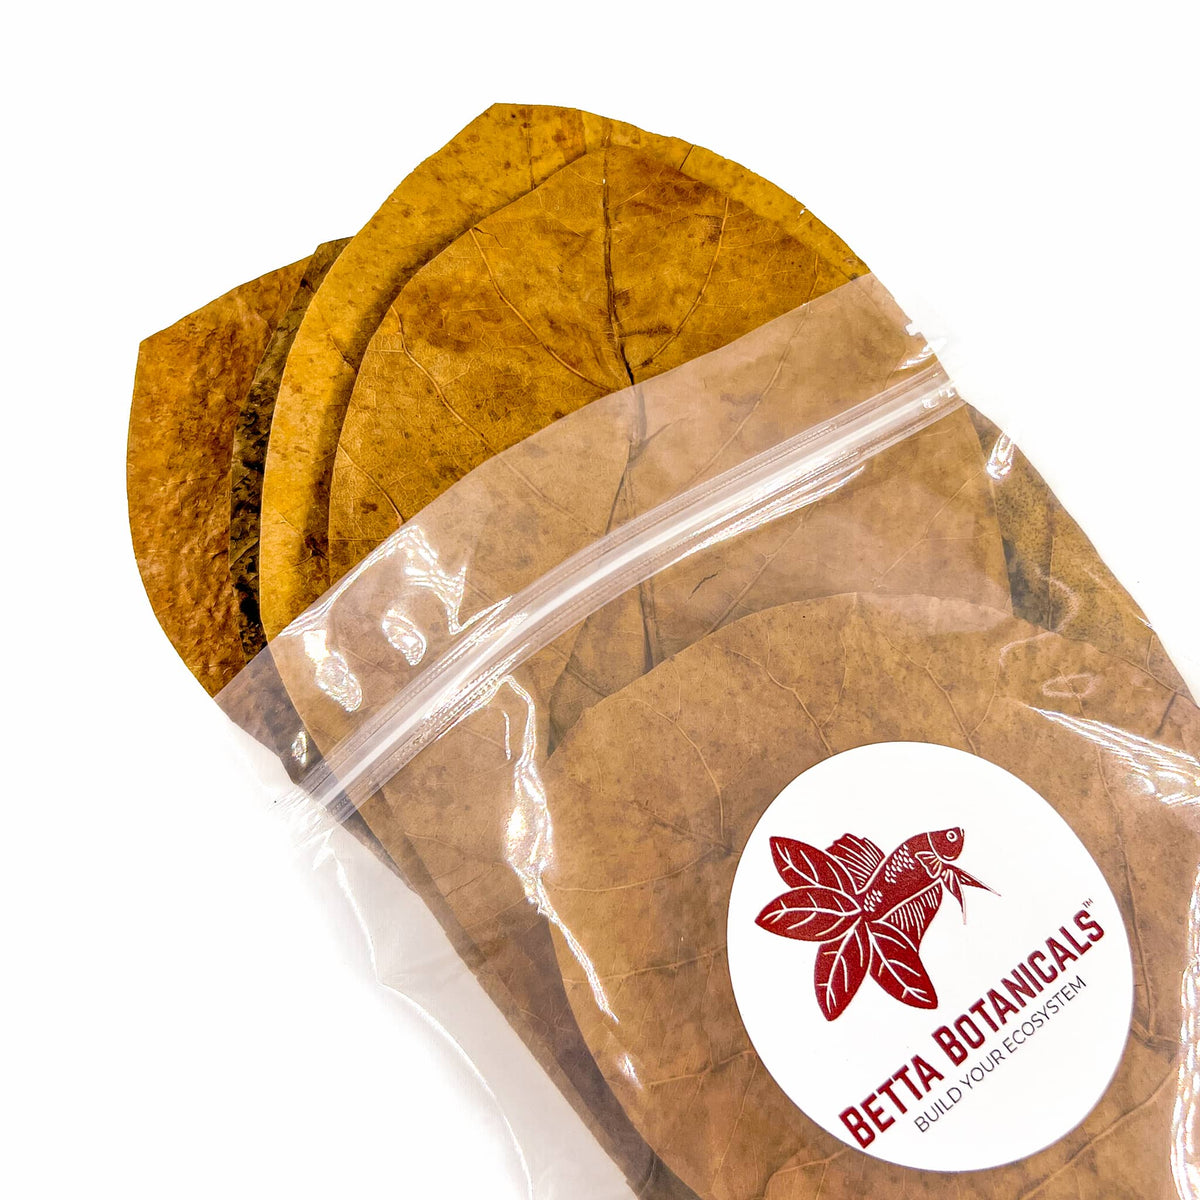 Pile of brown, tan, and flat large Indian almond leaves and catappa leaves for aquariums in clear sustainable packaging by Betta Botanicals.